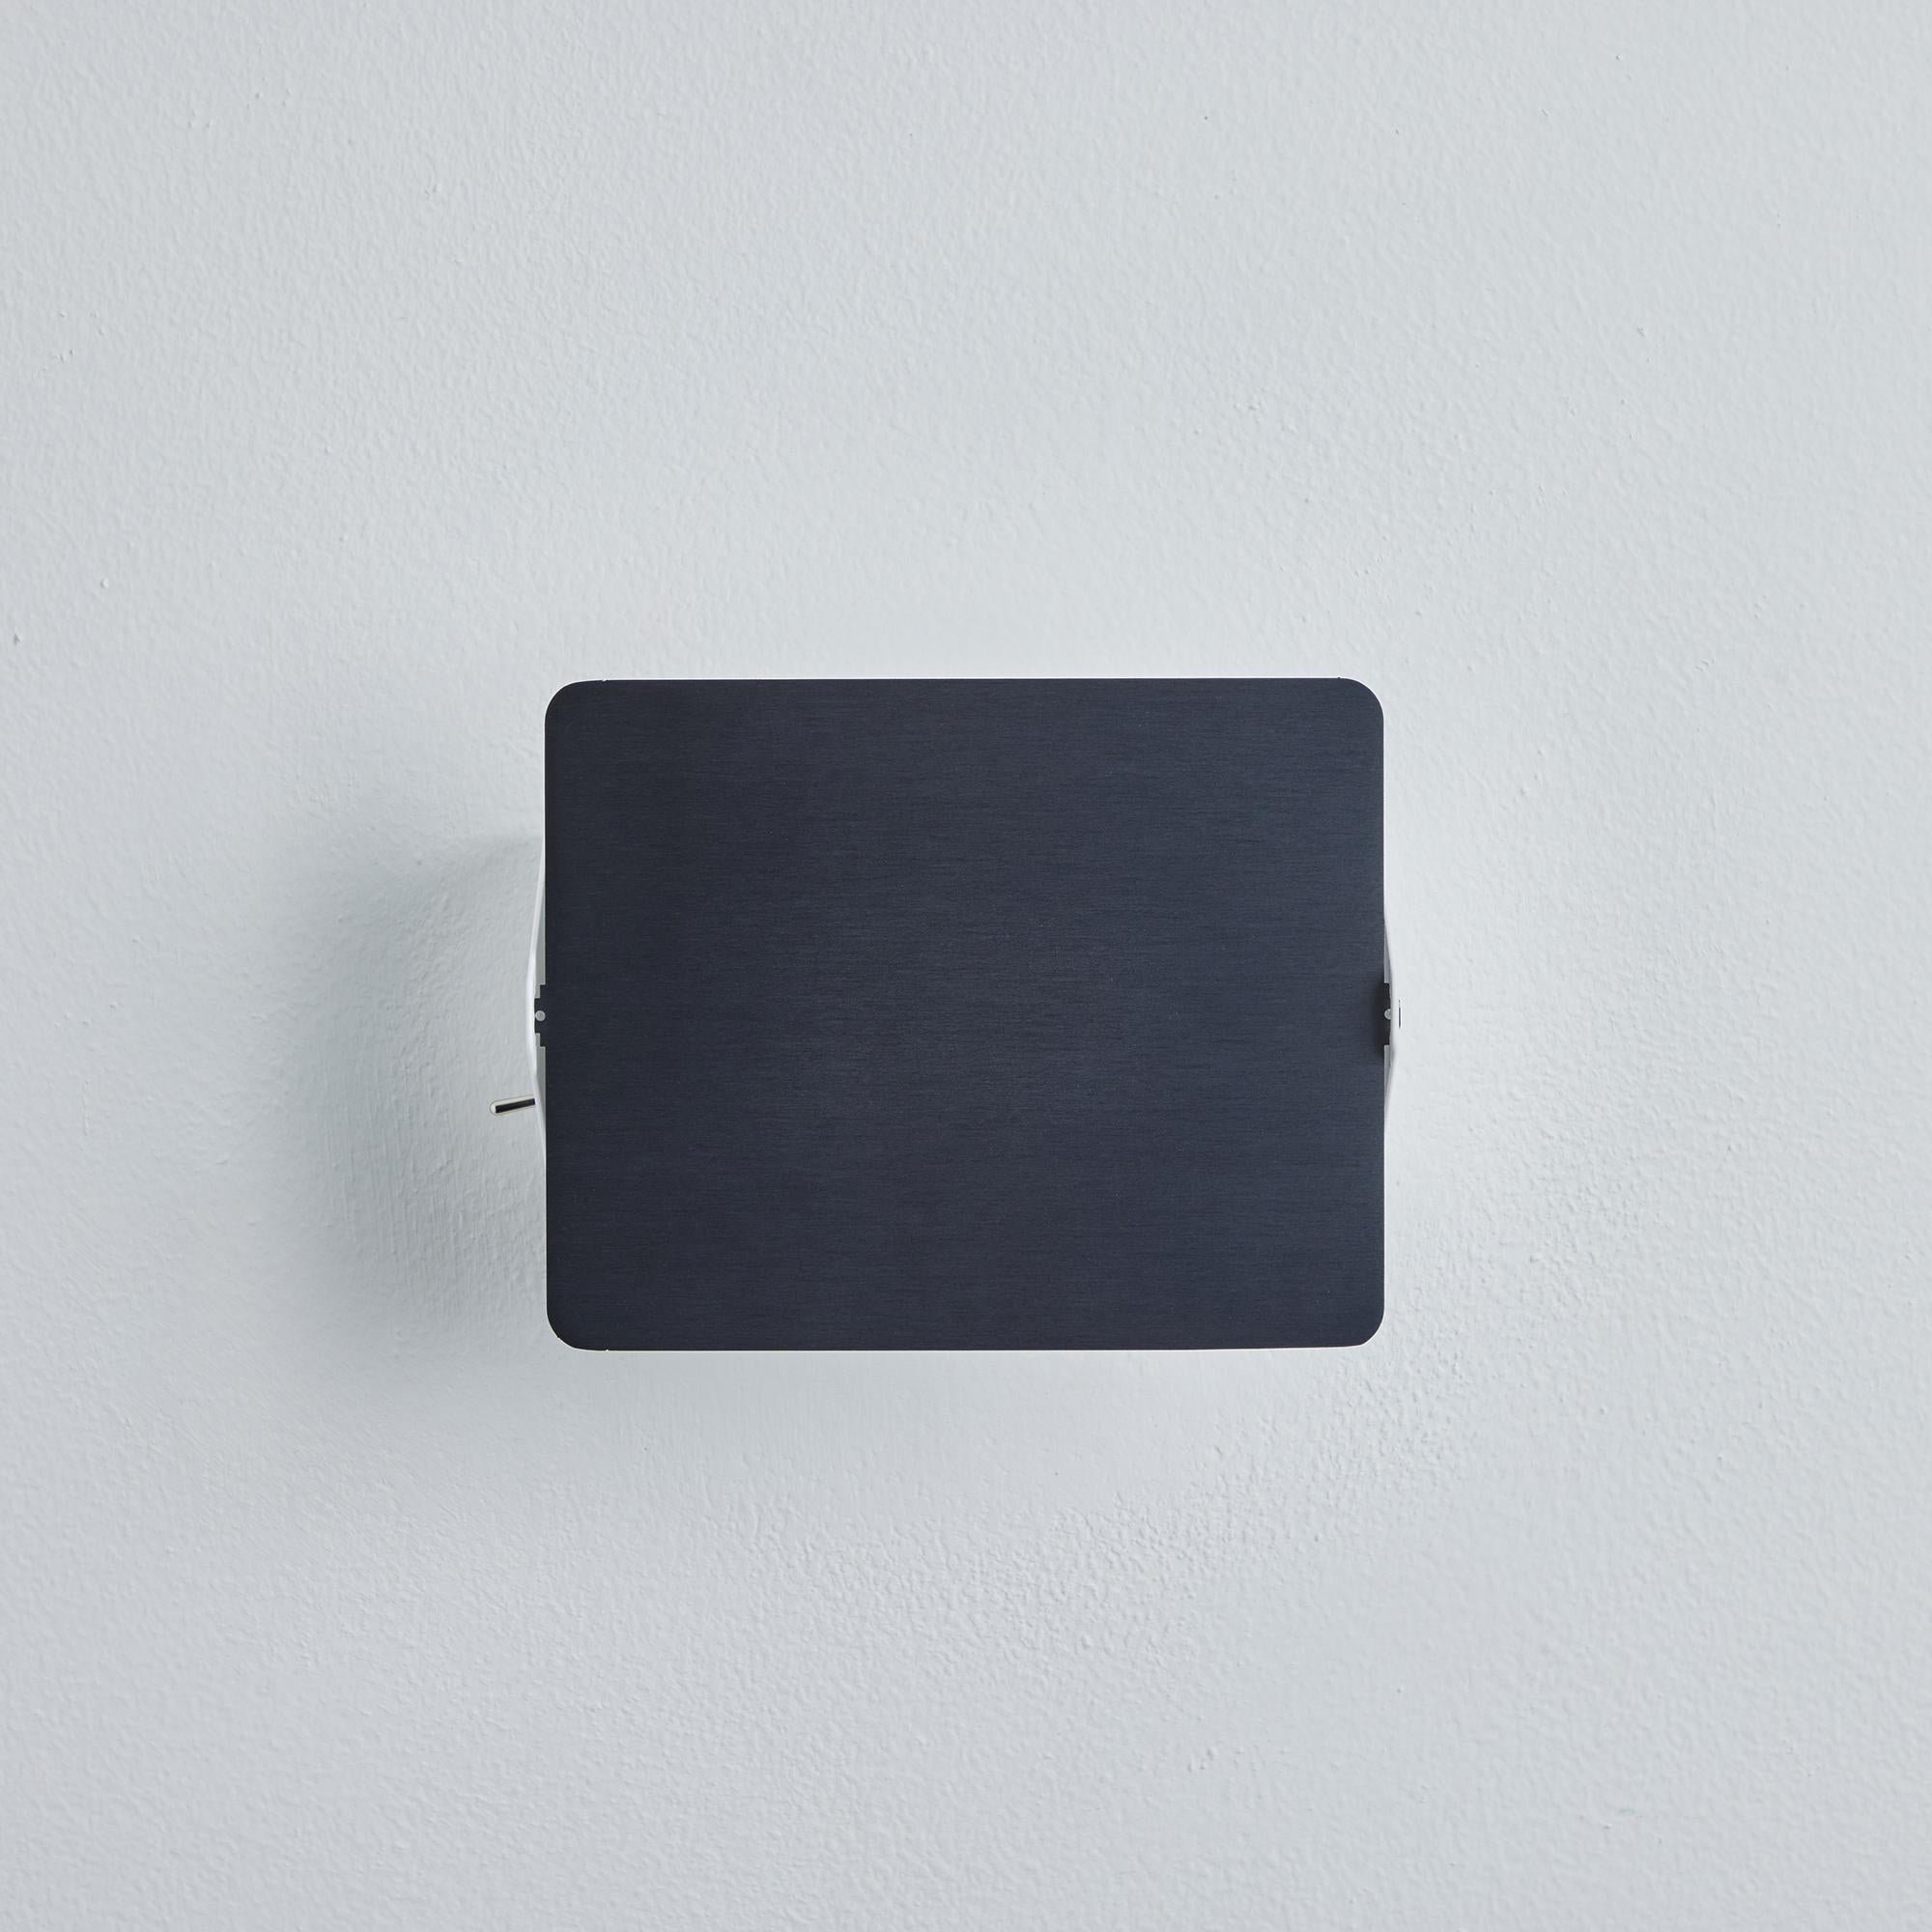 Anodized Charlotte Perriand 'Applique Á Volet Pivotant' Wall Light in Black and White For Sale